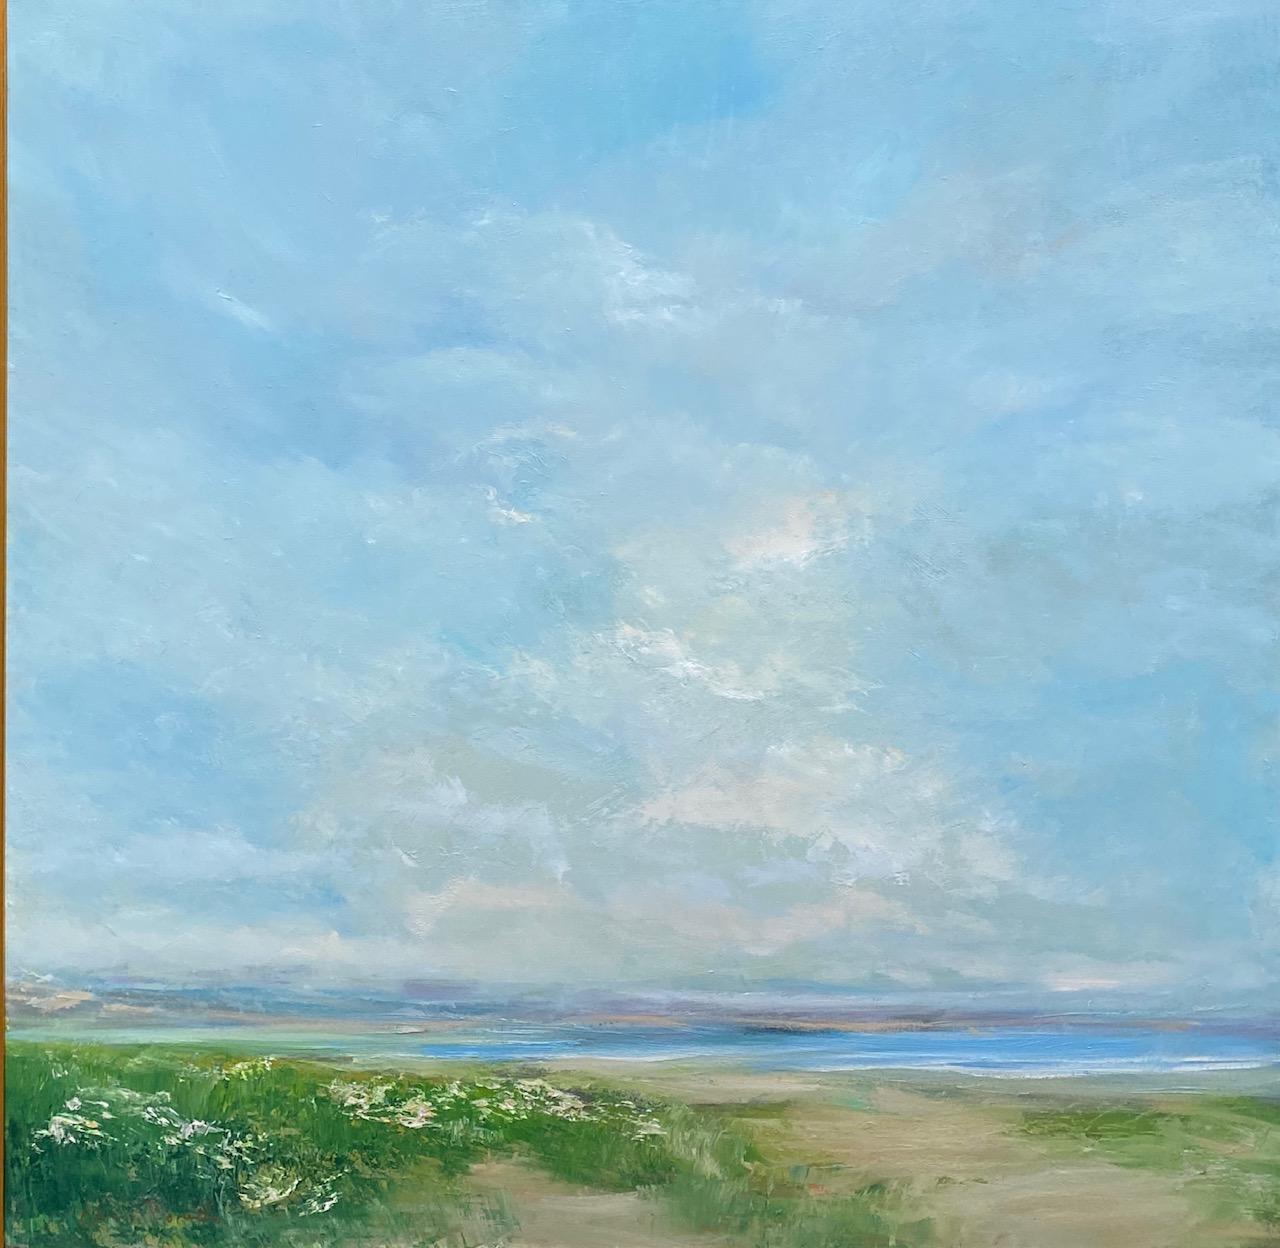 White Statice by the Sea, original 36x36 contemporary marine landscape - Painting by Karen Ponelli